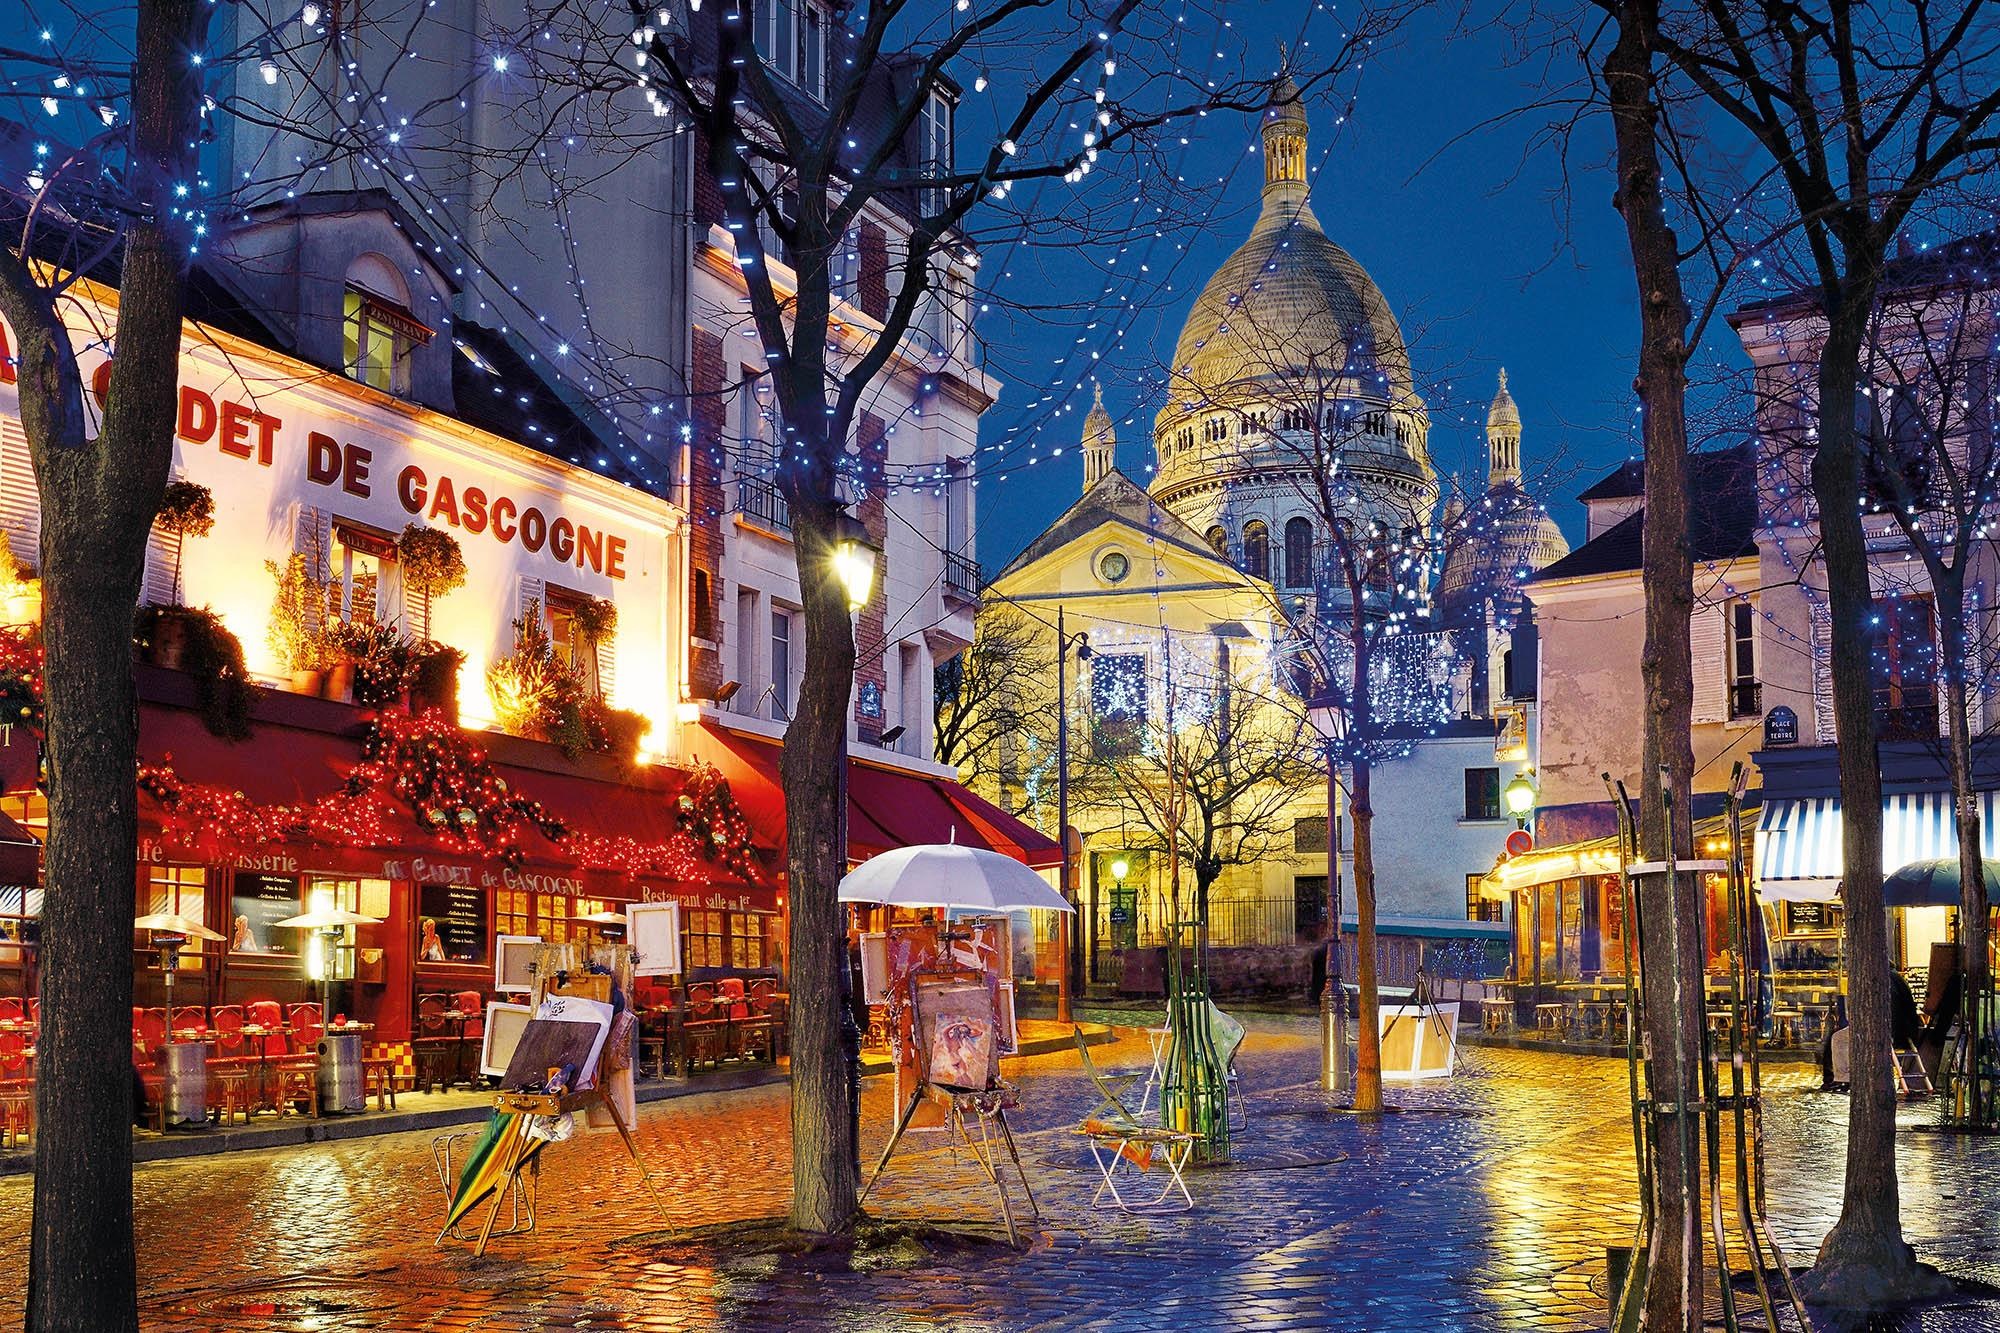 Clementoni® Puzzle »High Quality Collection, Montmartre«, Made in Europe